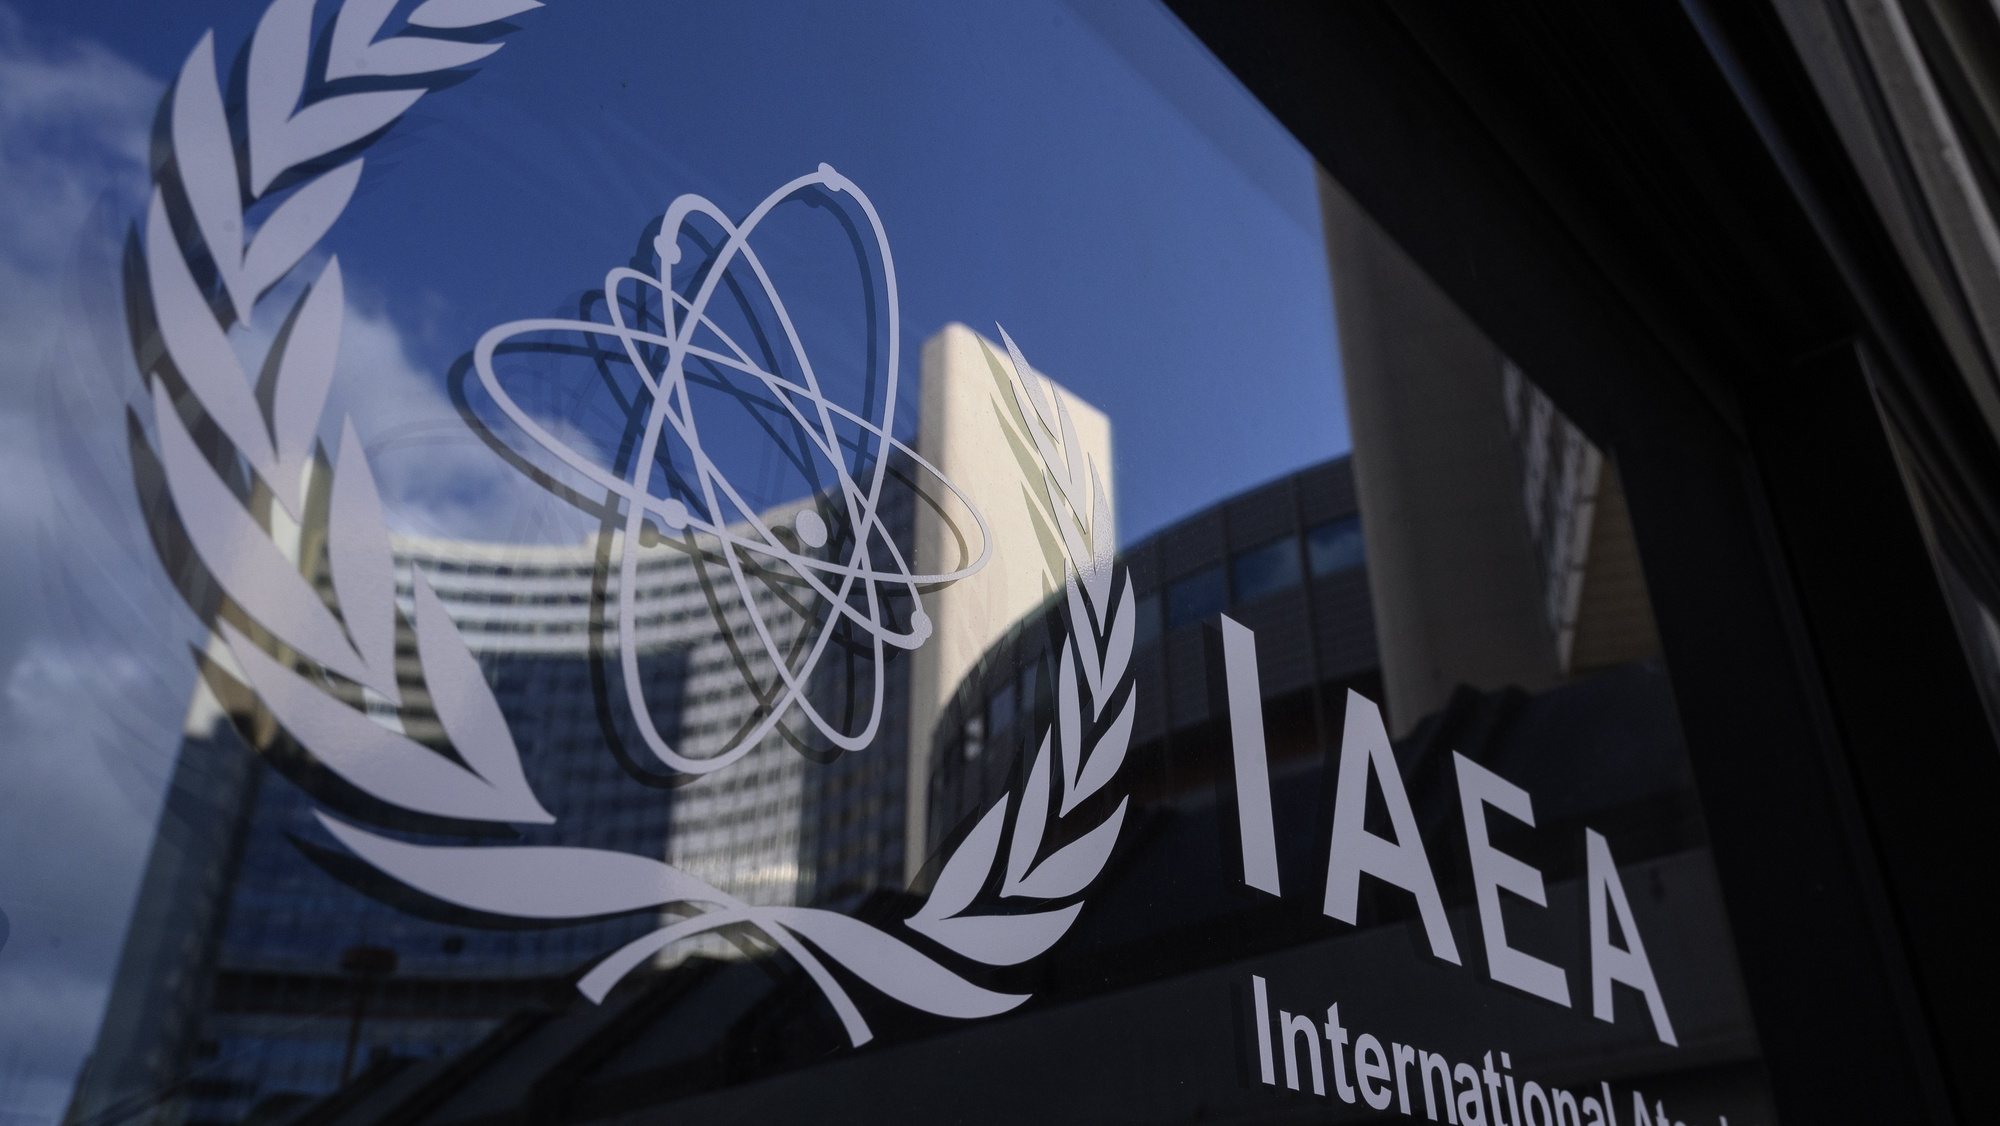 epa09224033 A logo of the International Atomic Energy Agency (IAEA) is seen in front of the IAEA headquarters of the UN seat in Vienna, Austria, 23 May 2021. A press conference of IAEA Director General Rafael Mariano Grossi is expected on 24 May 2021, after consultations with Iran regarding the technical understanding between the IAEA and Iran.  EPA/CHRISTIAN BRUNA